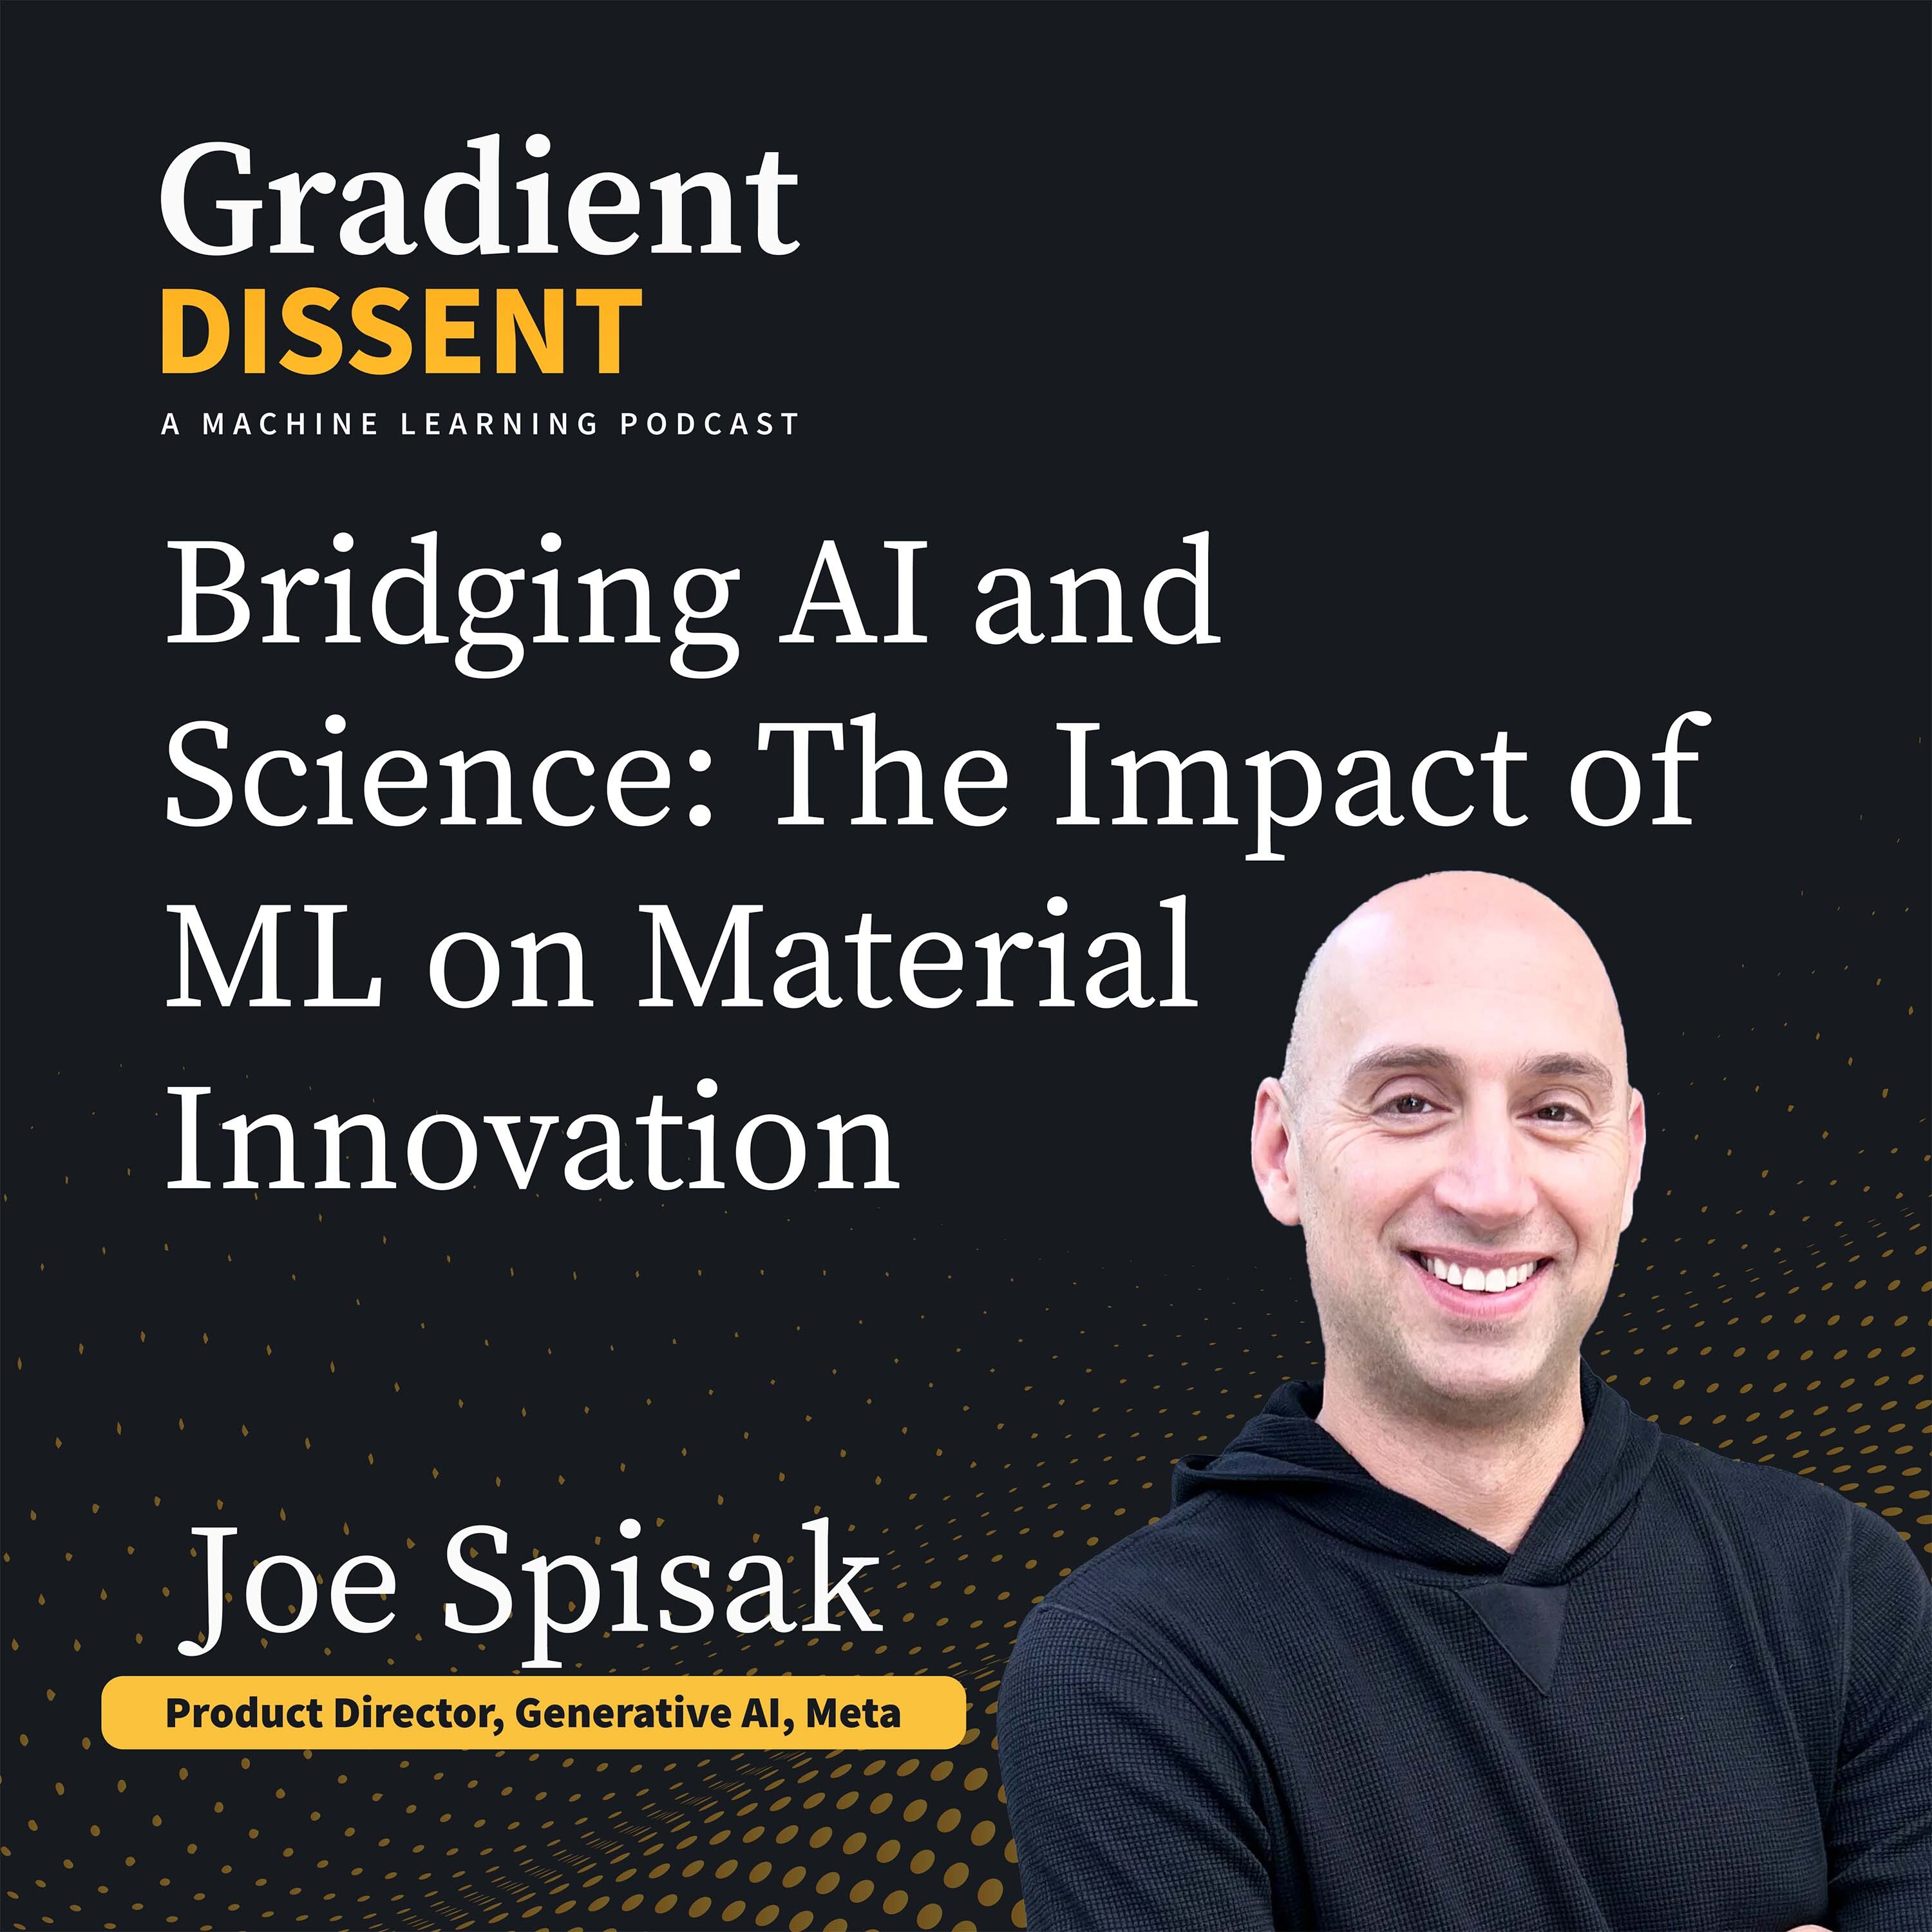 Bridging AI and Science: The Impact of Machine Learning on Material Innovation with Joe Spisak of Meta